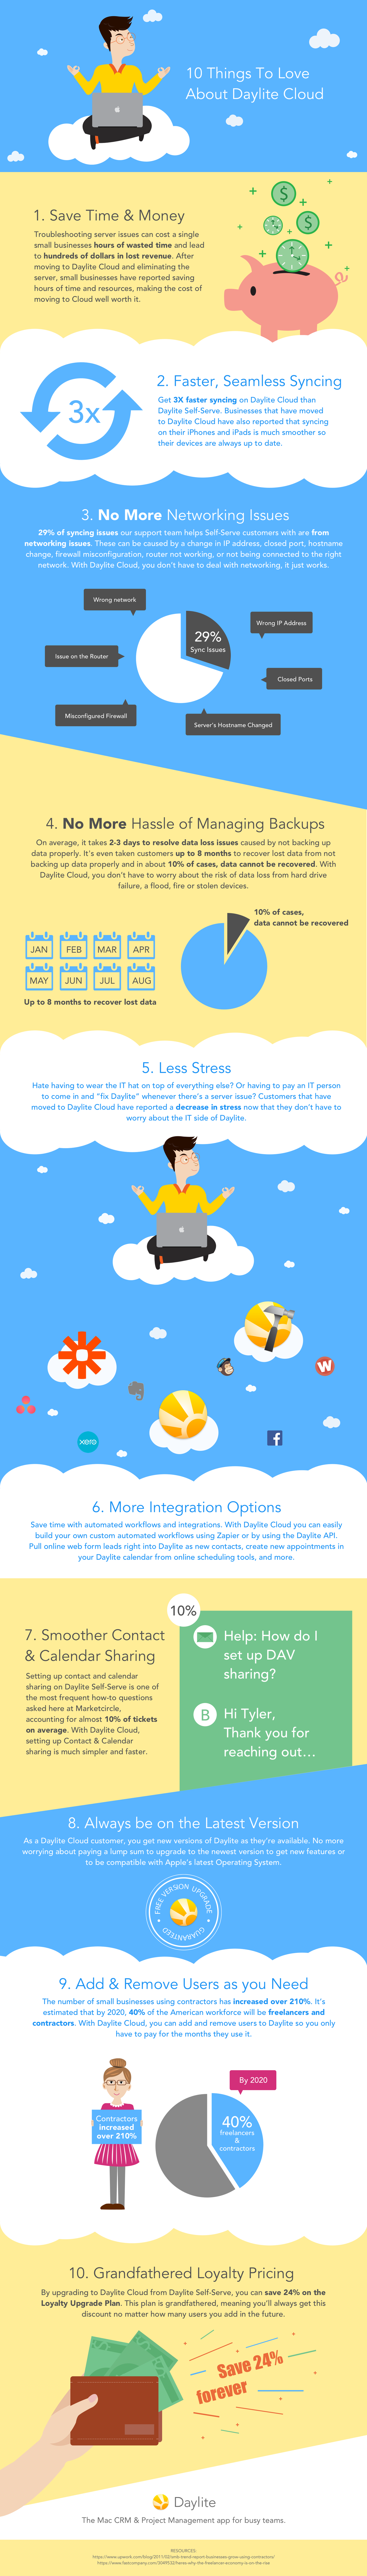 infographic Daylite Cloud